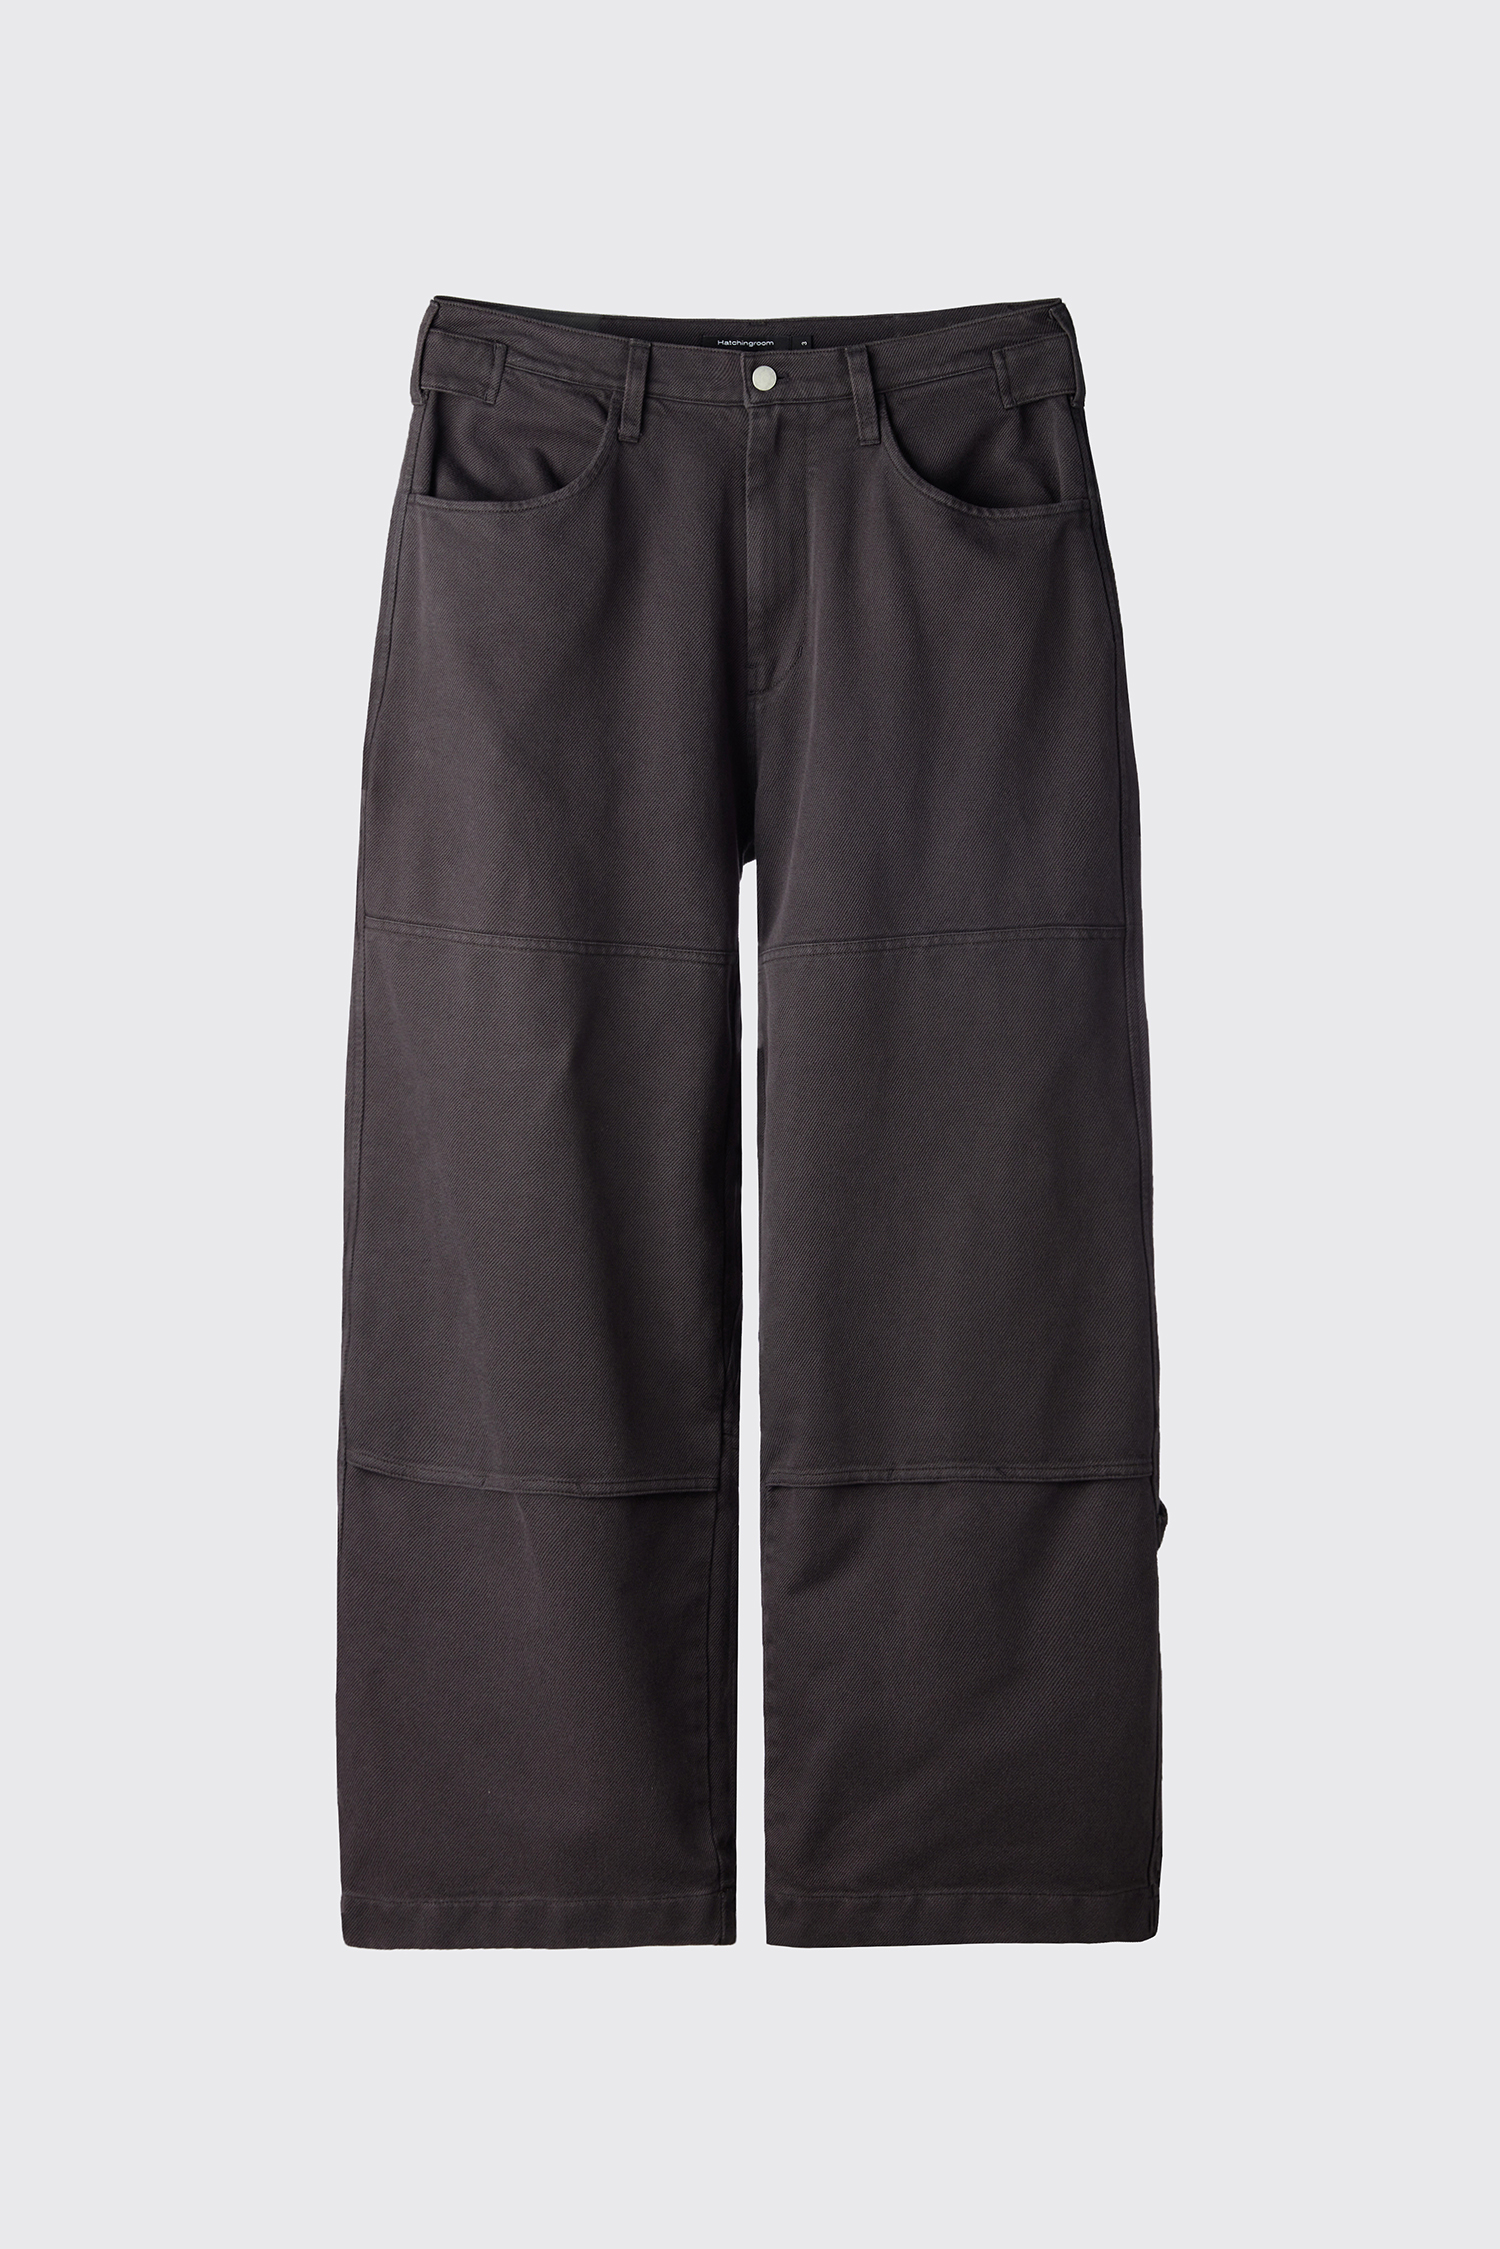 Double Knee Work Pants Washed Charcoal